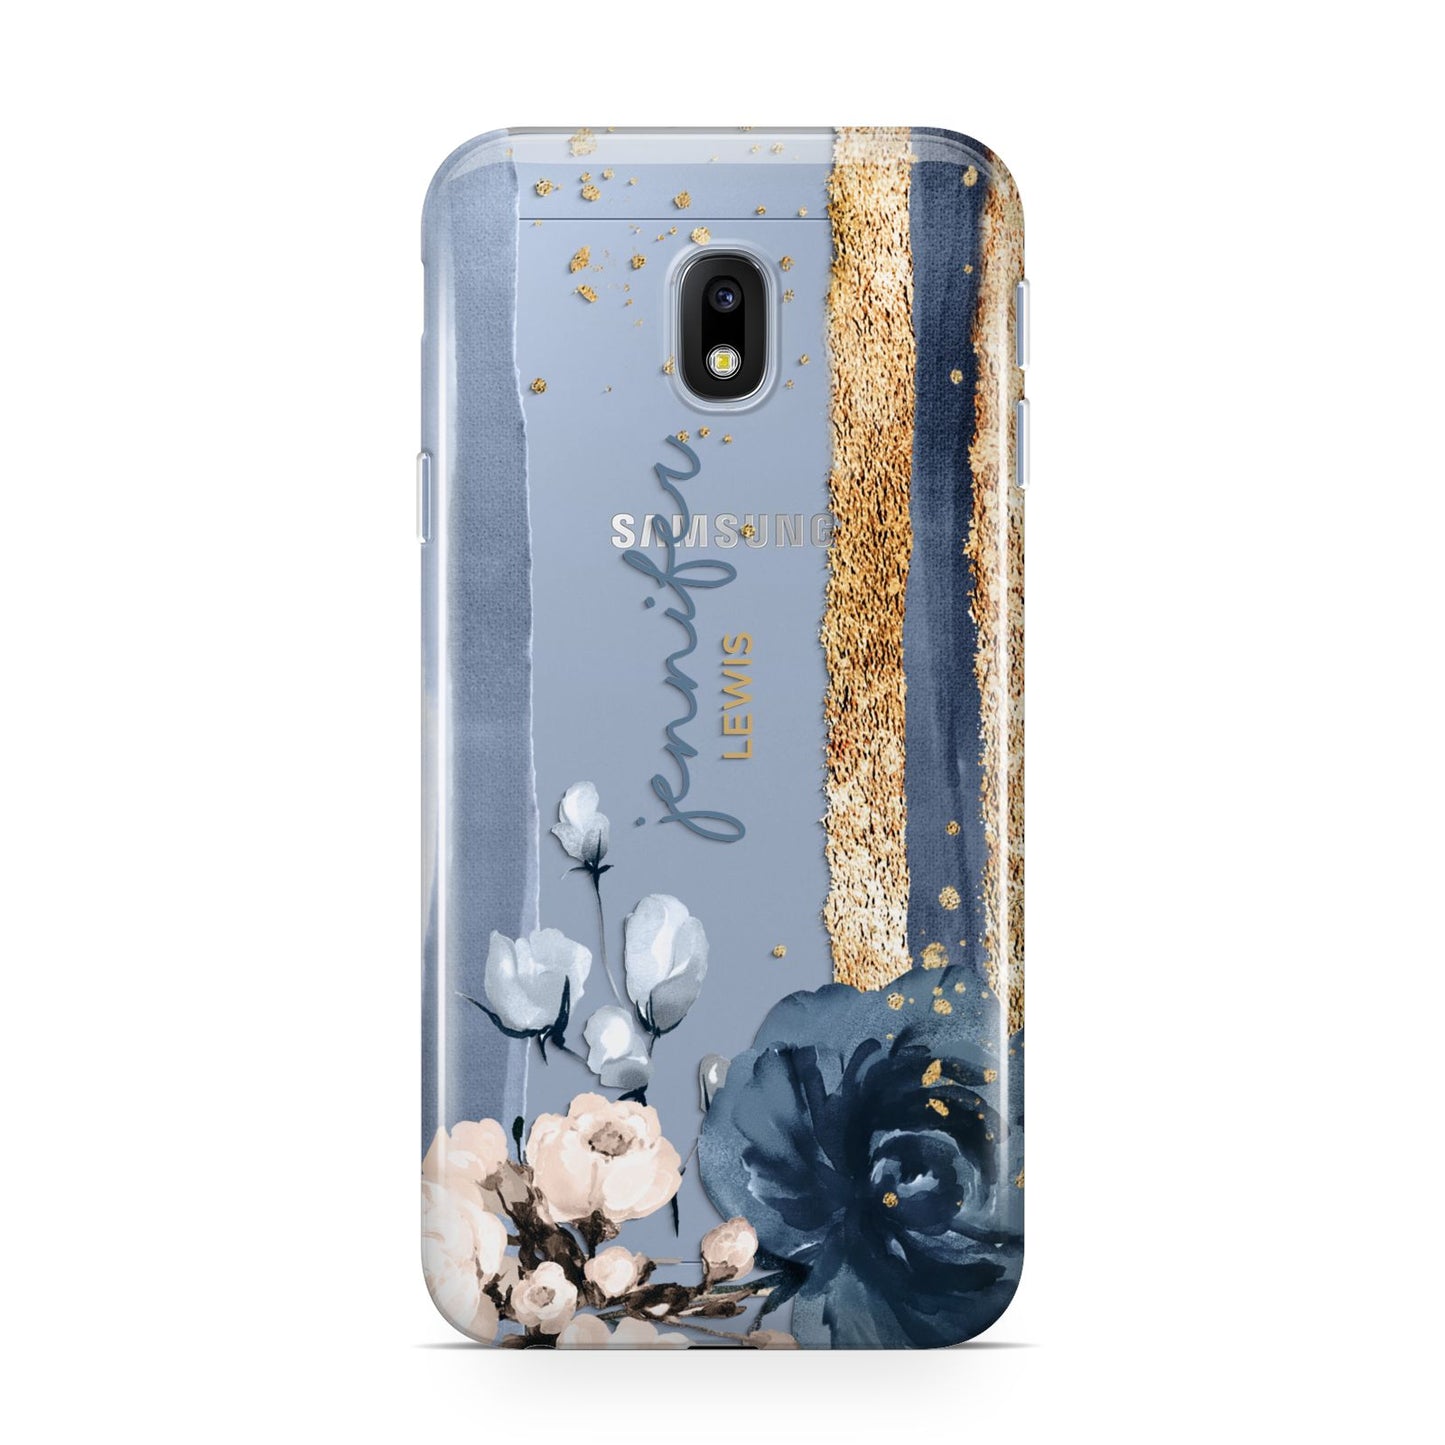 Personalised Blue Gold Name Samsung Galaxy J3 2017 Case